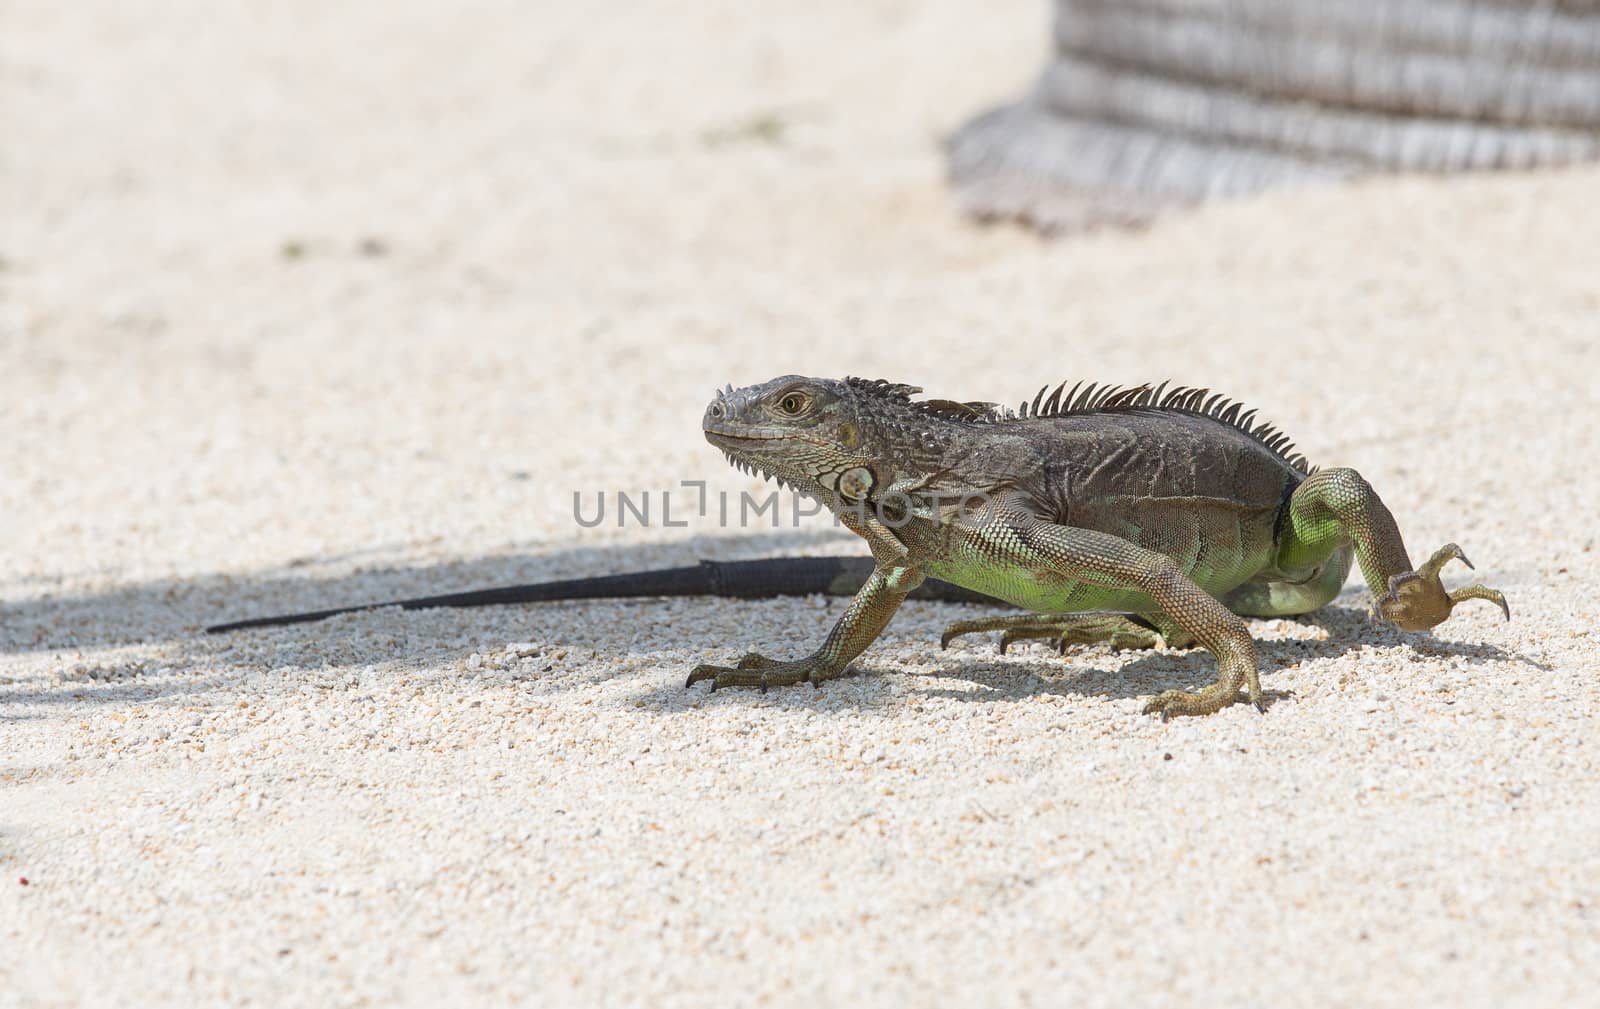 The image was taken at Marathon in the Florida Keys. Although Iguana are numerous in the Keys, they are not a native species. It is thought they were initially introduced to the area by disillusioned pet owners.